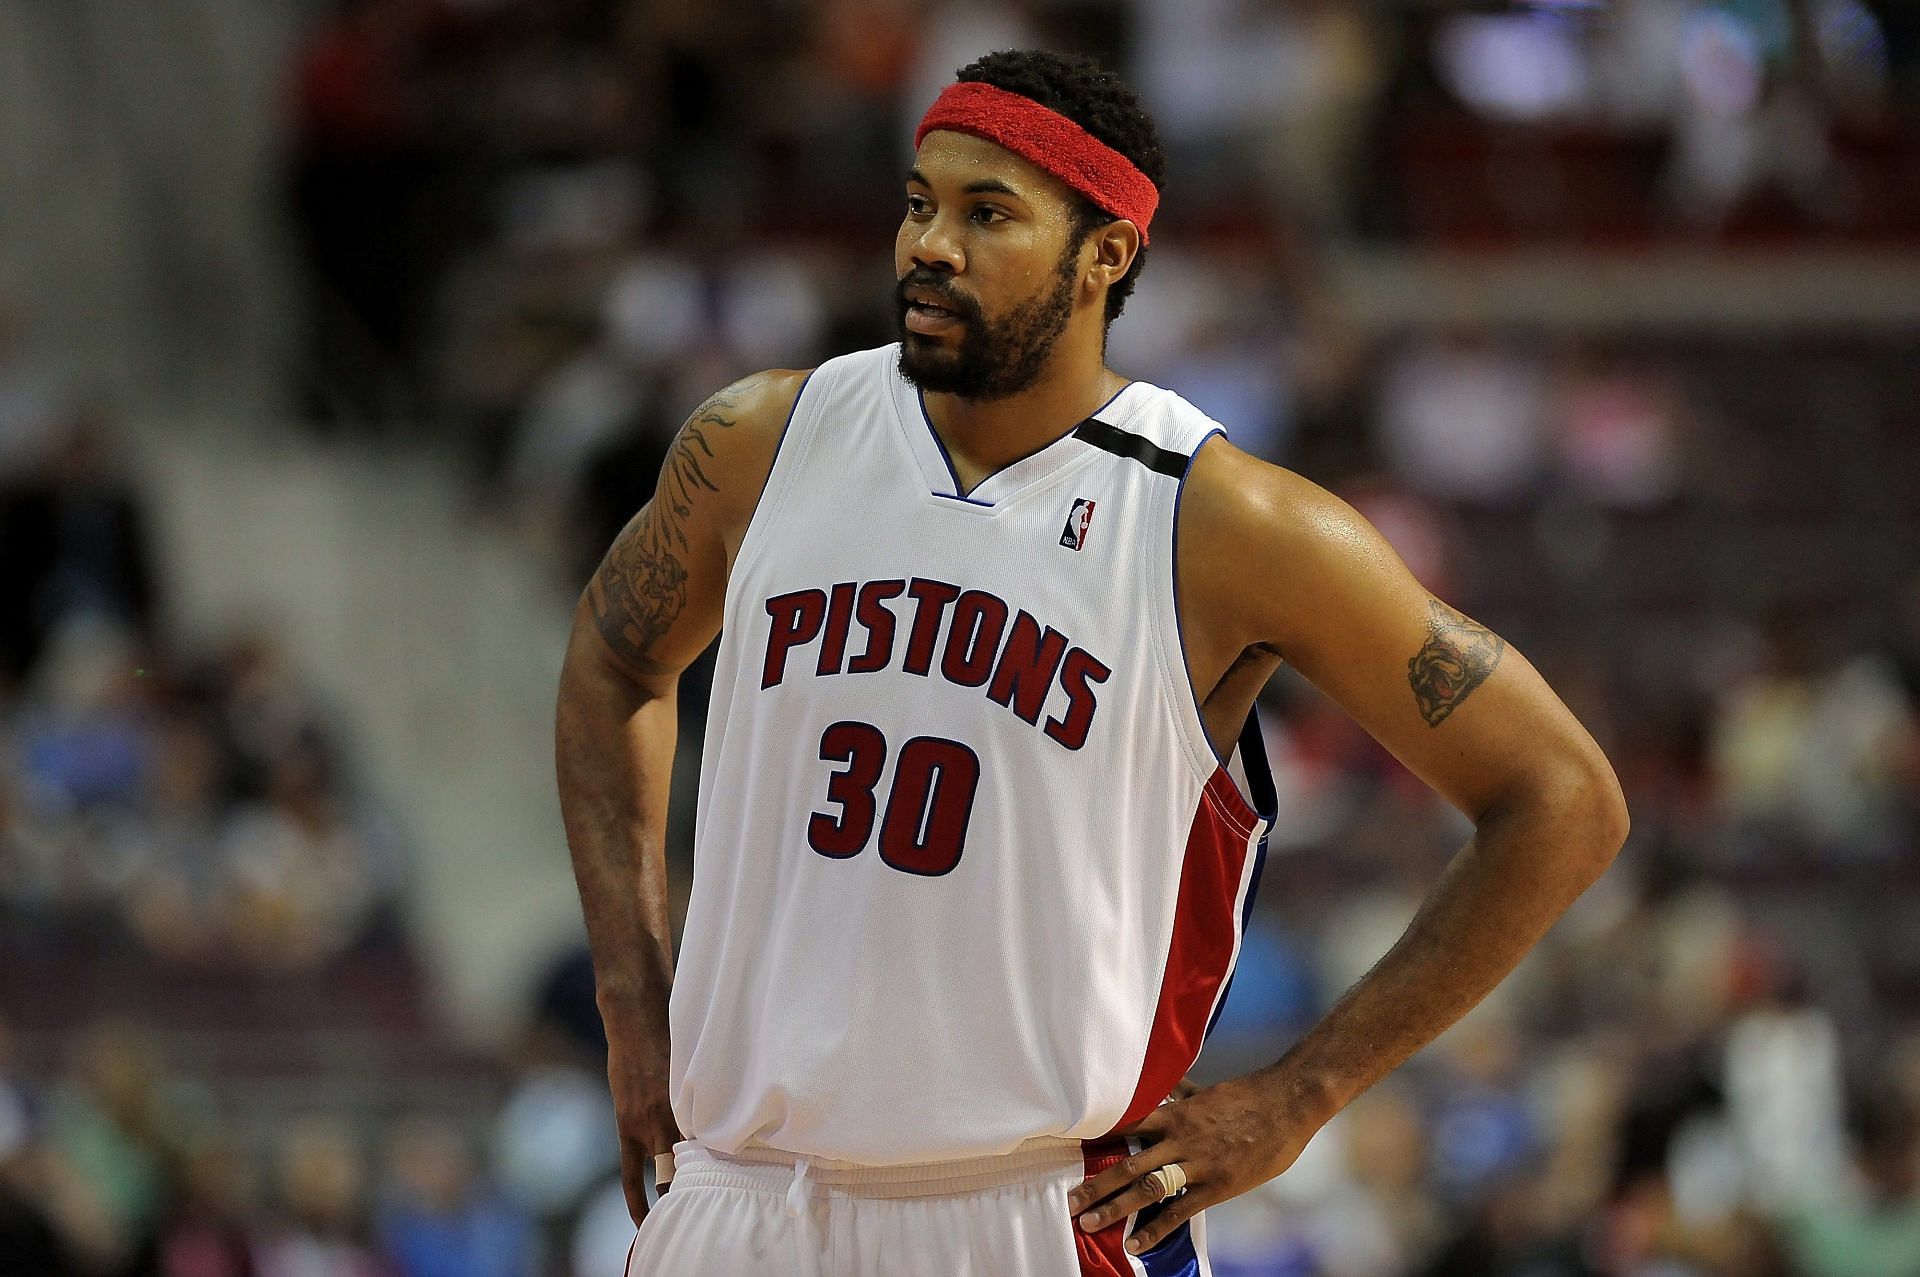 Rasheed Wallace during his time with the Detroit Pistons.